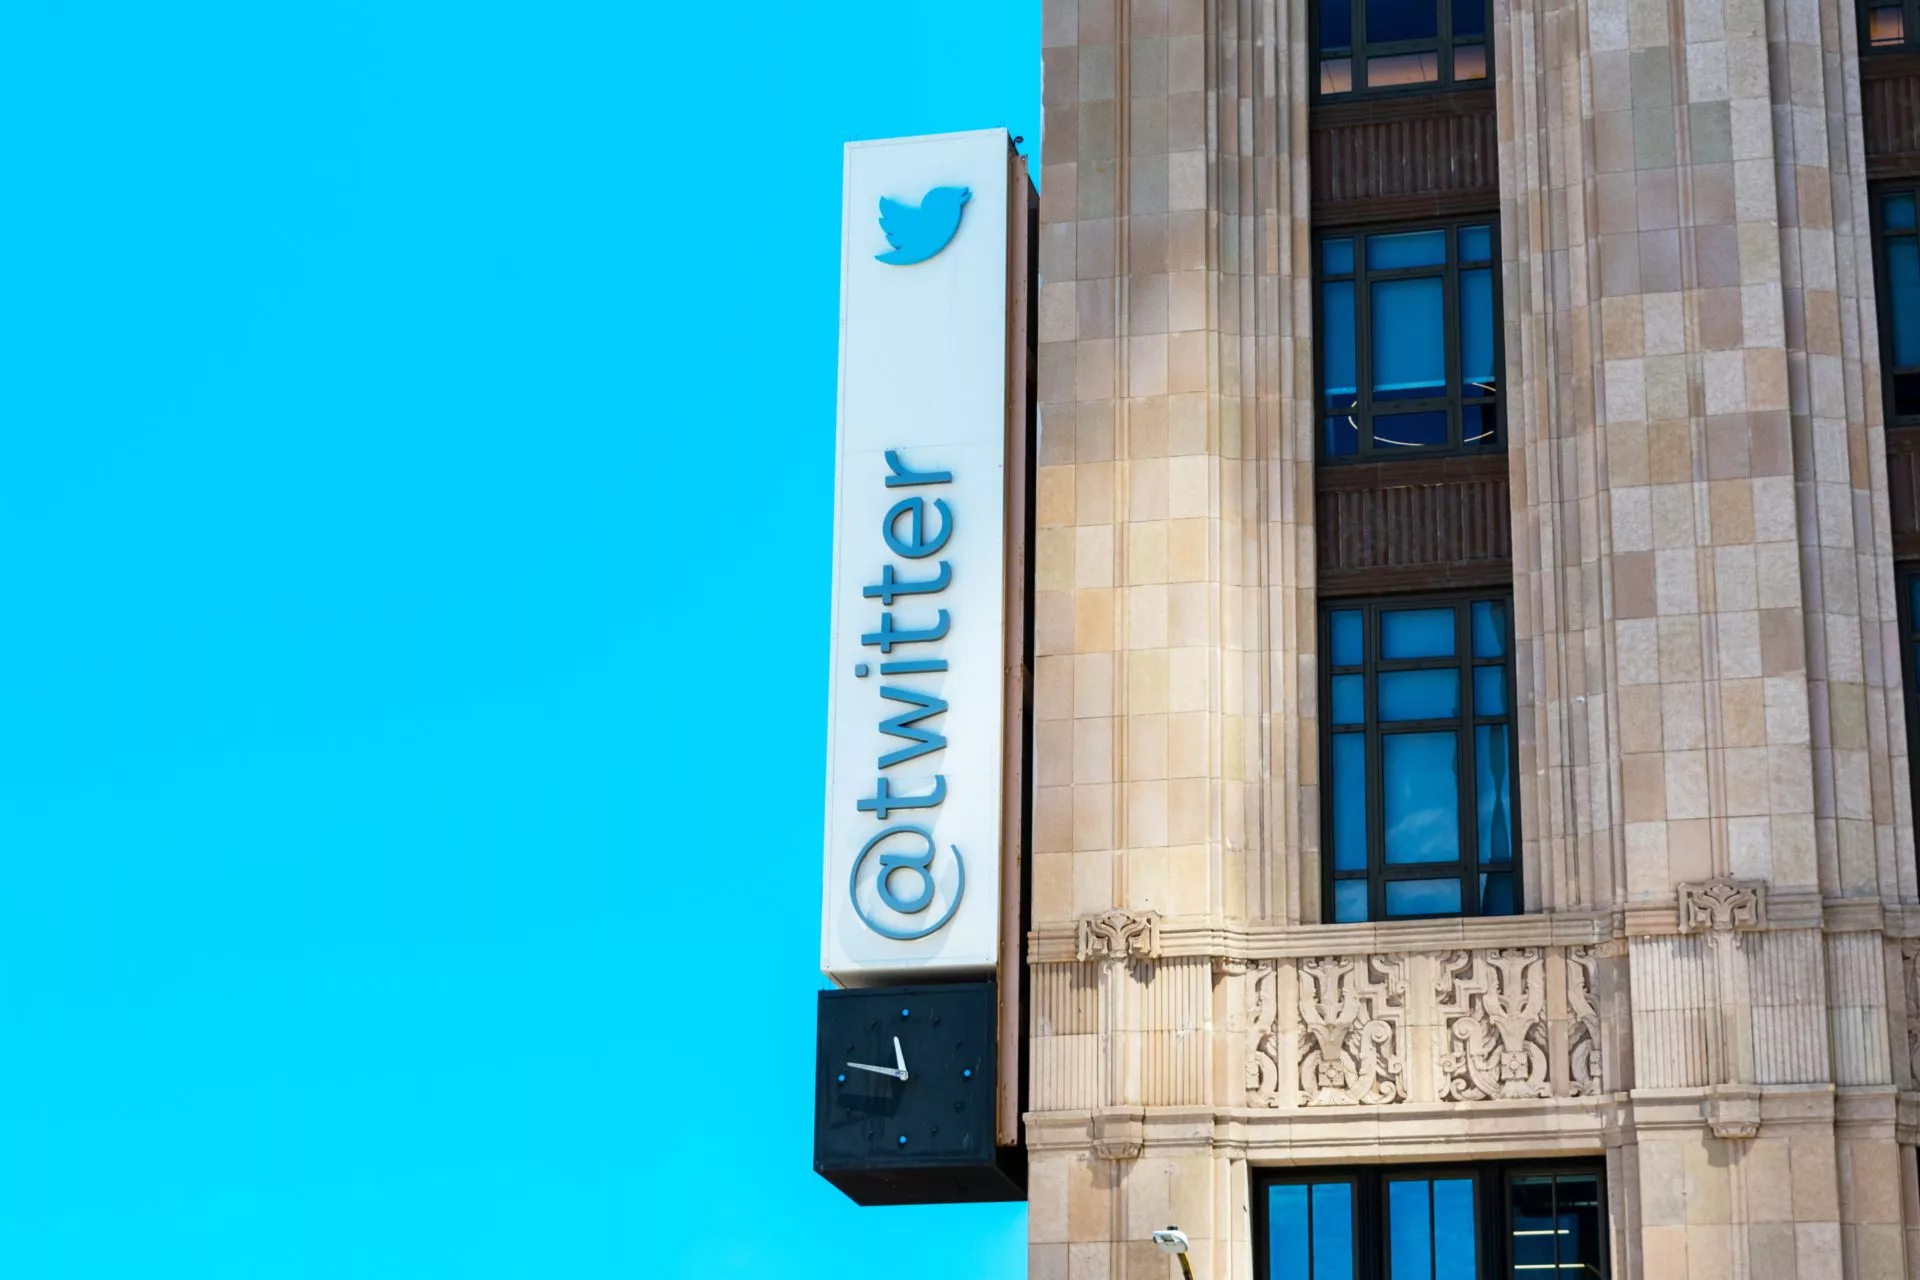 Twitter sign and logo on facade of global headquarters building at 1355 Market Street